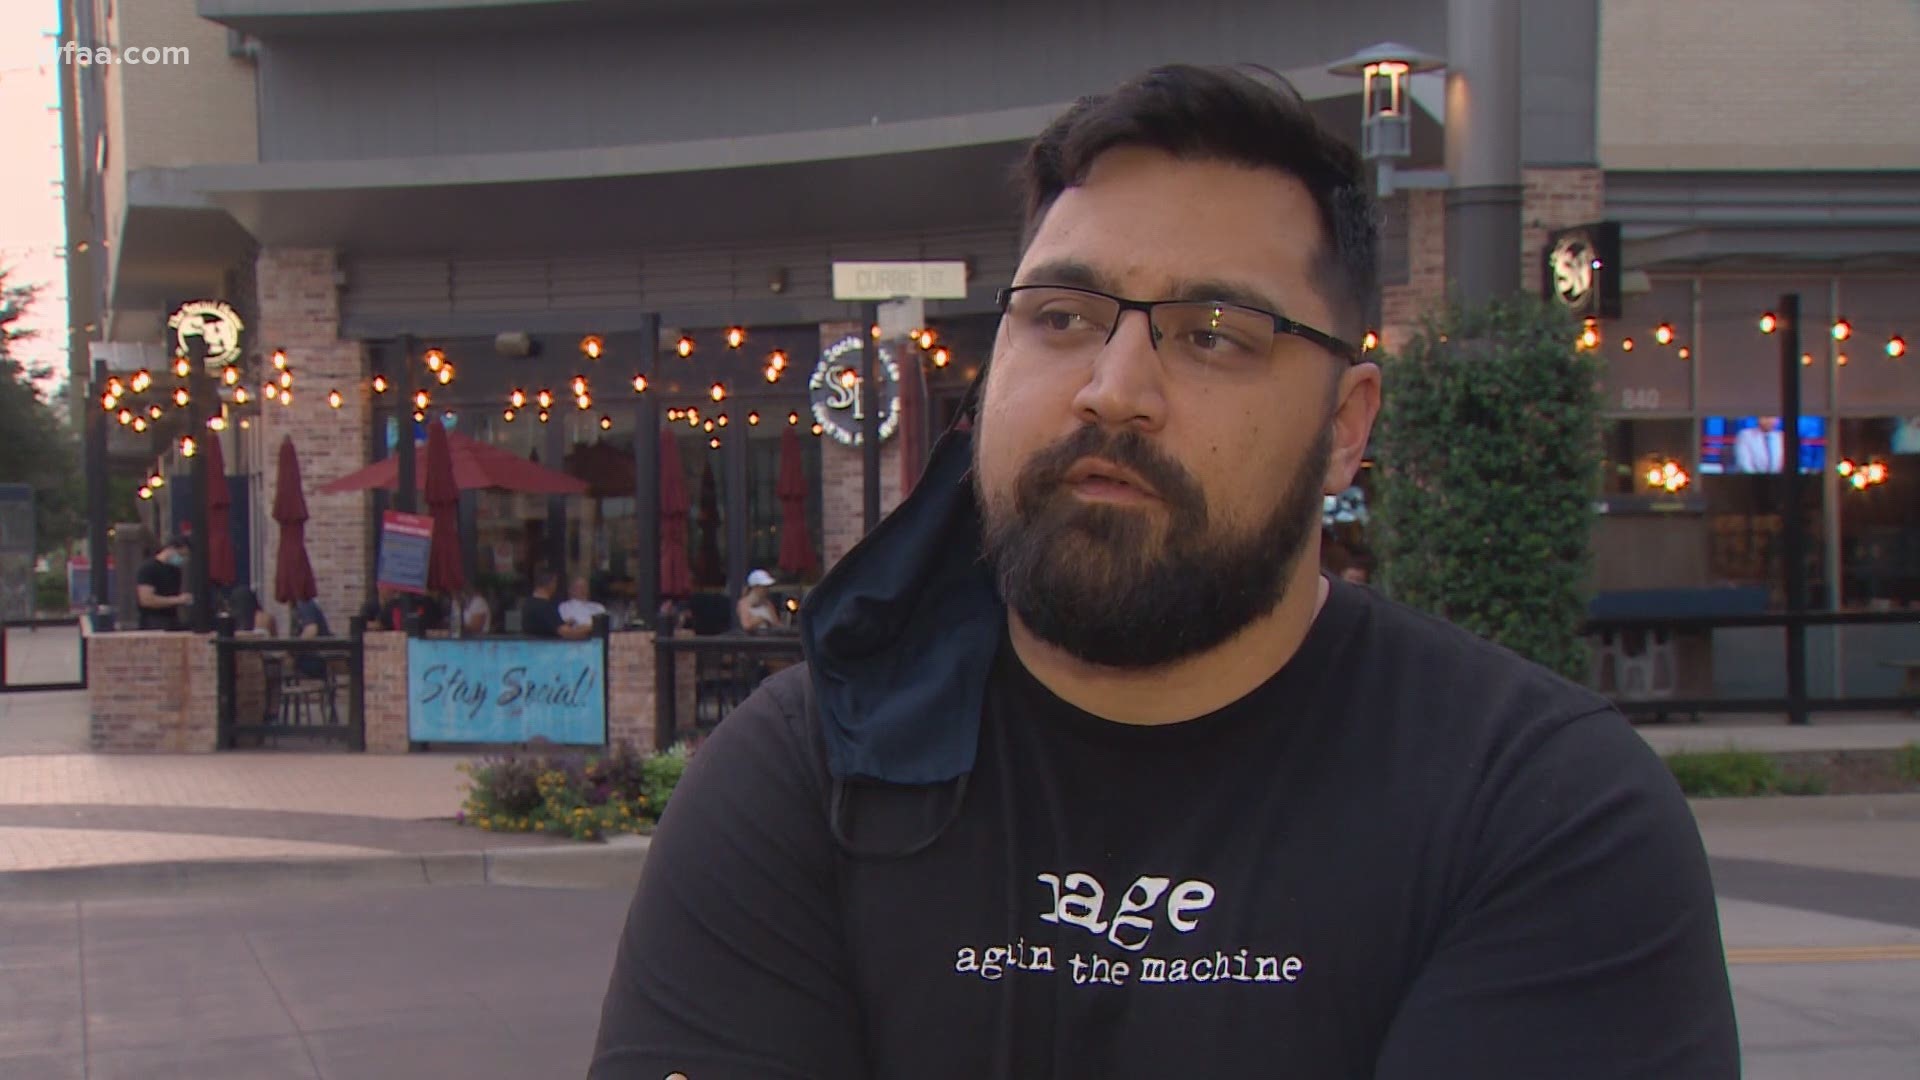 People out at West 7th spoke to WFAA reporter Matt Howerton about Justice Ruth Bader Ginsburg.